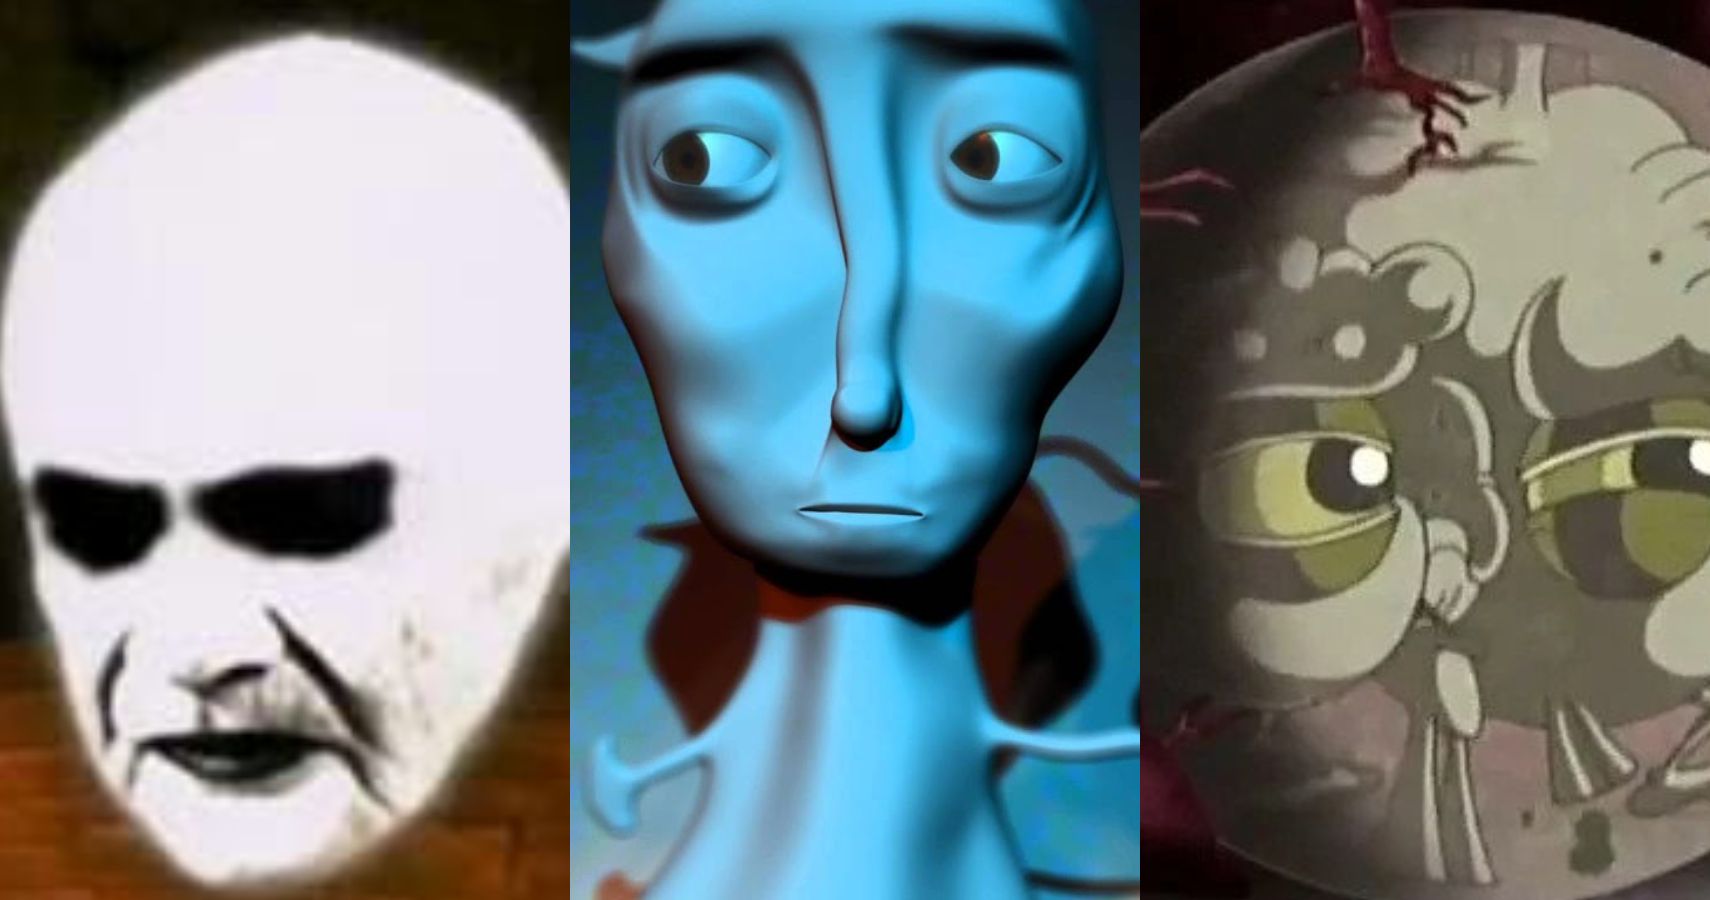 10 Creepiest Villains in Courage The Cowardly Dog10 Creepiest Villains in Courage The Cowardly Dog